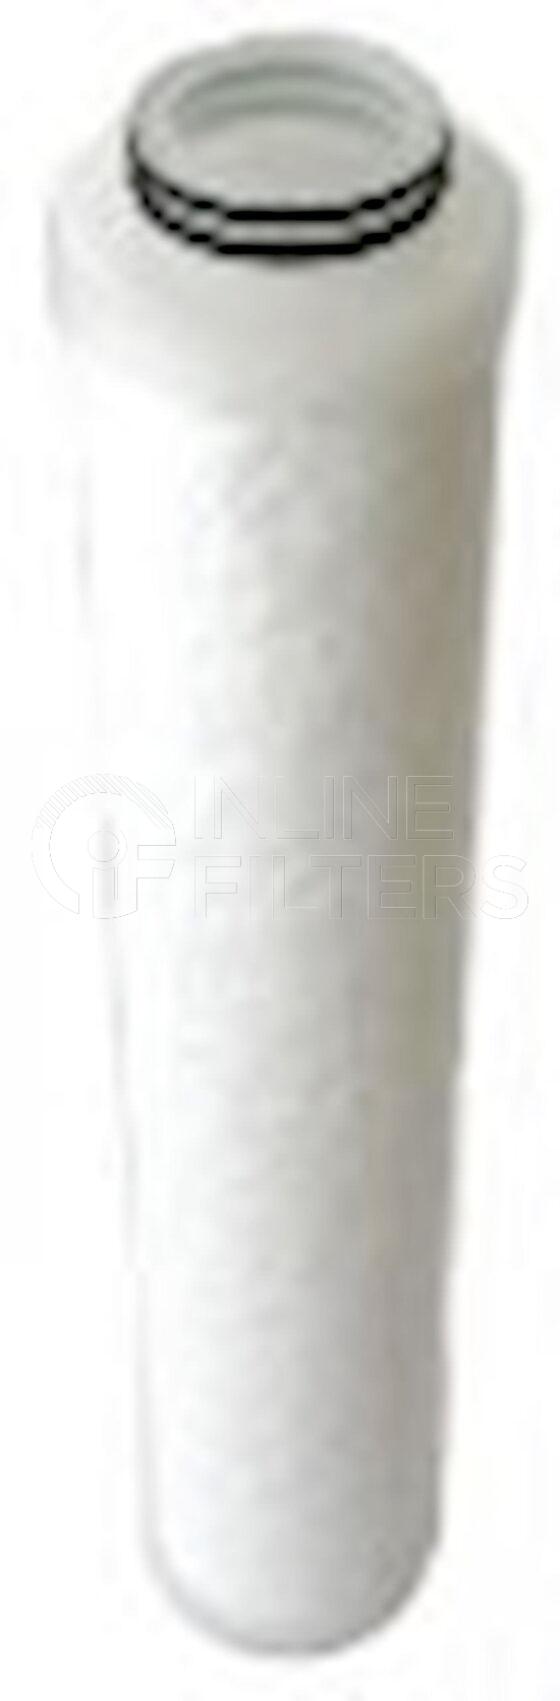 Inline FW90099. Water Filter Product – Brand Specific Inline – Undefined Product Water filter product